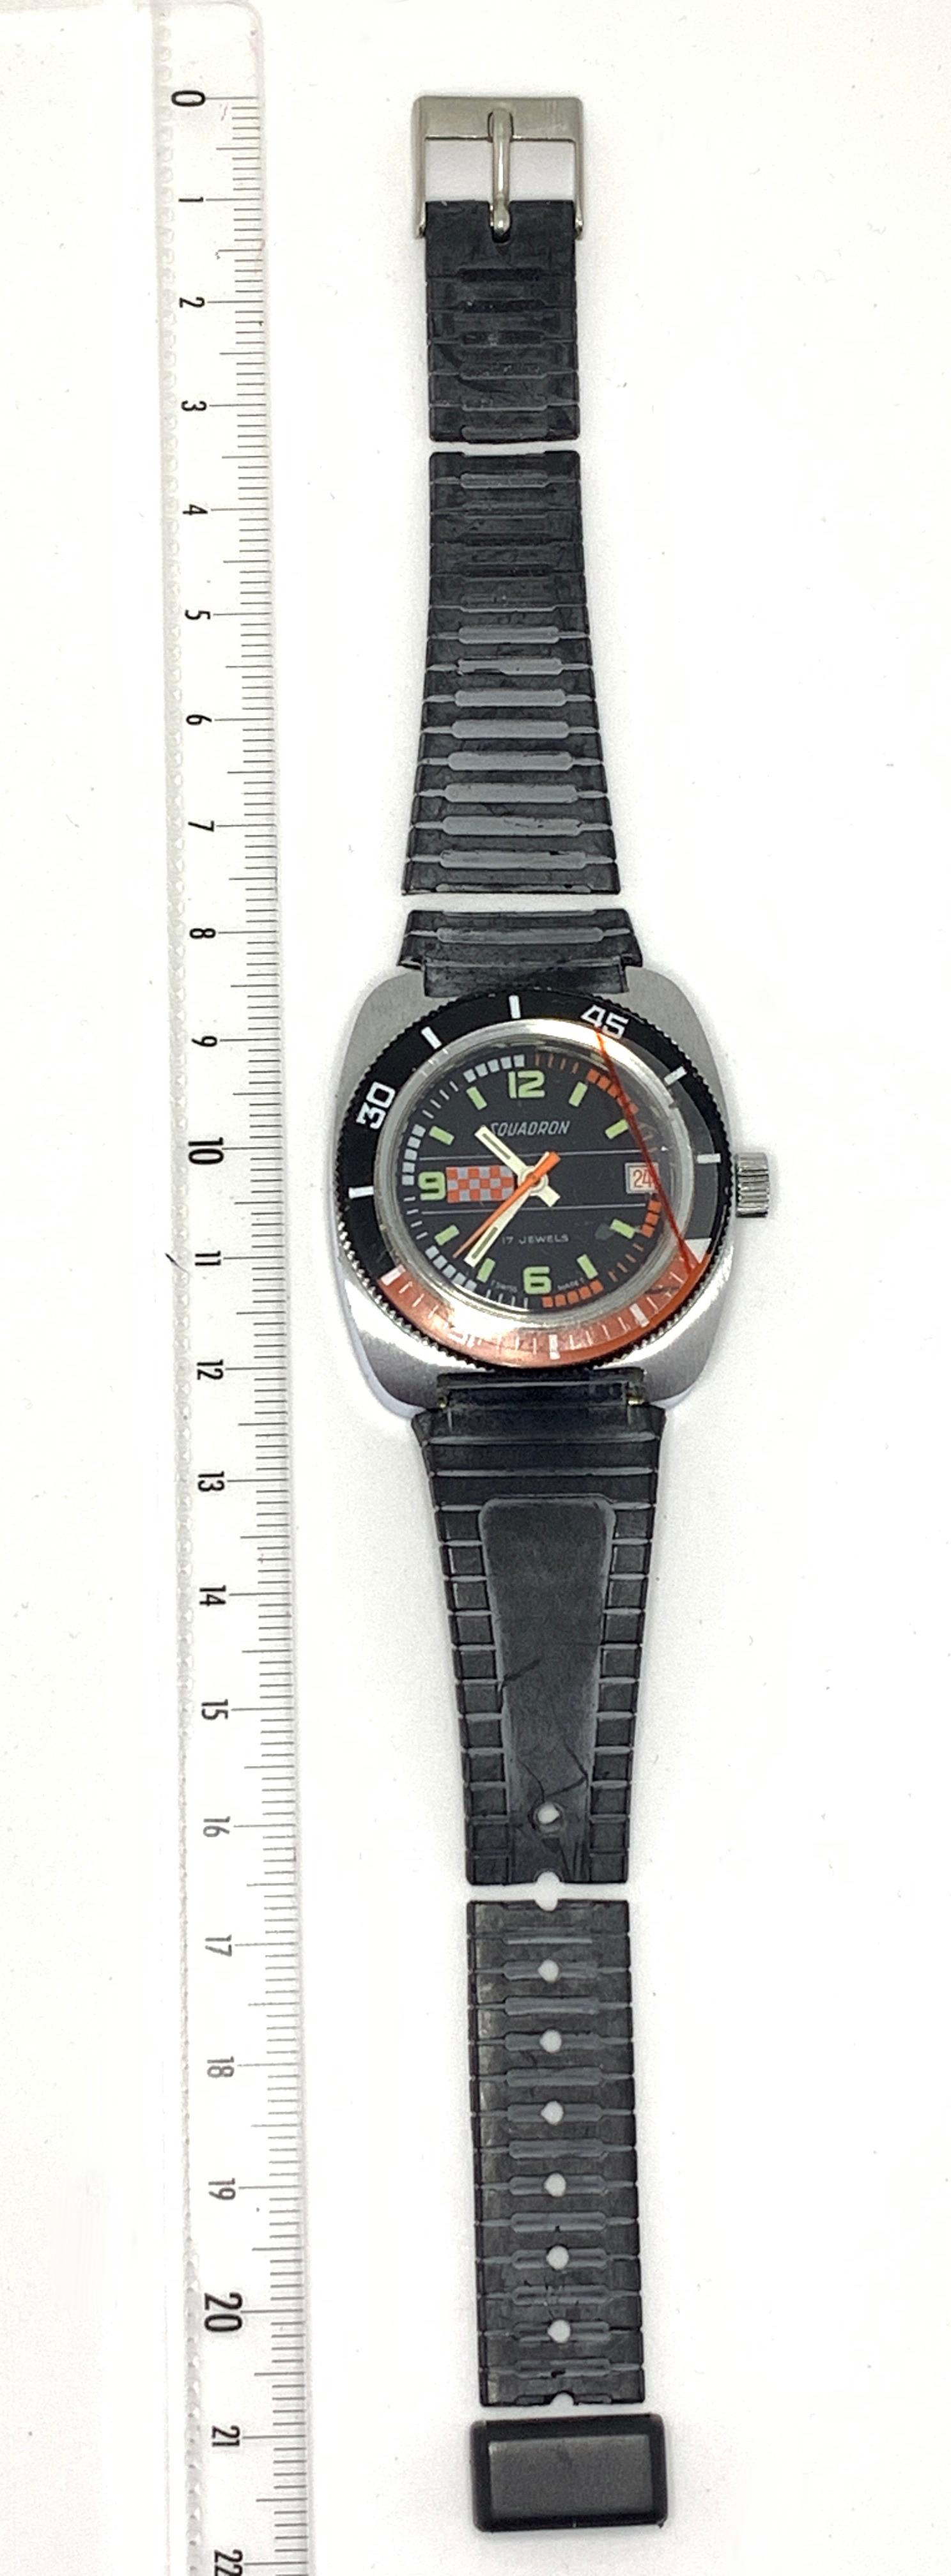 Squadron
diver's watch
steel/rubber wristband
water resistant 100 metres
date 3 hours
circa 1970
New from stock
1 new bracelet free
290 euros